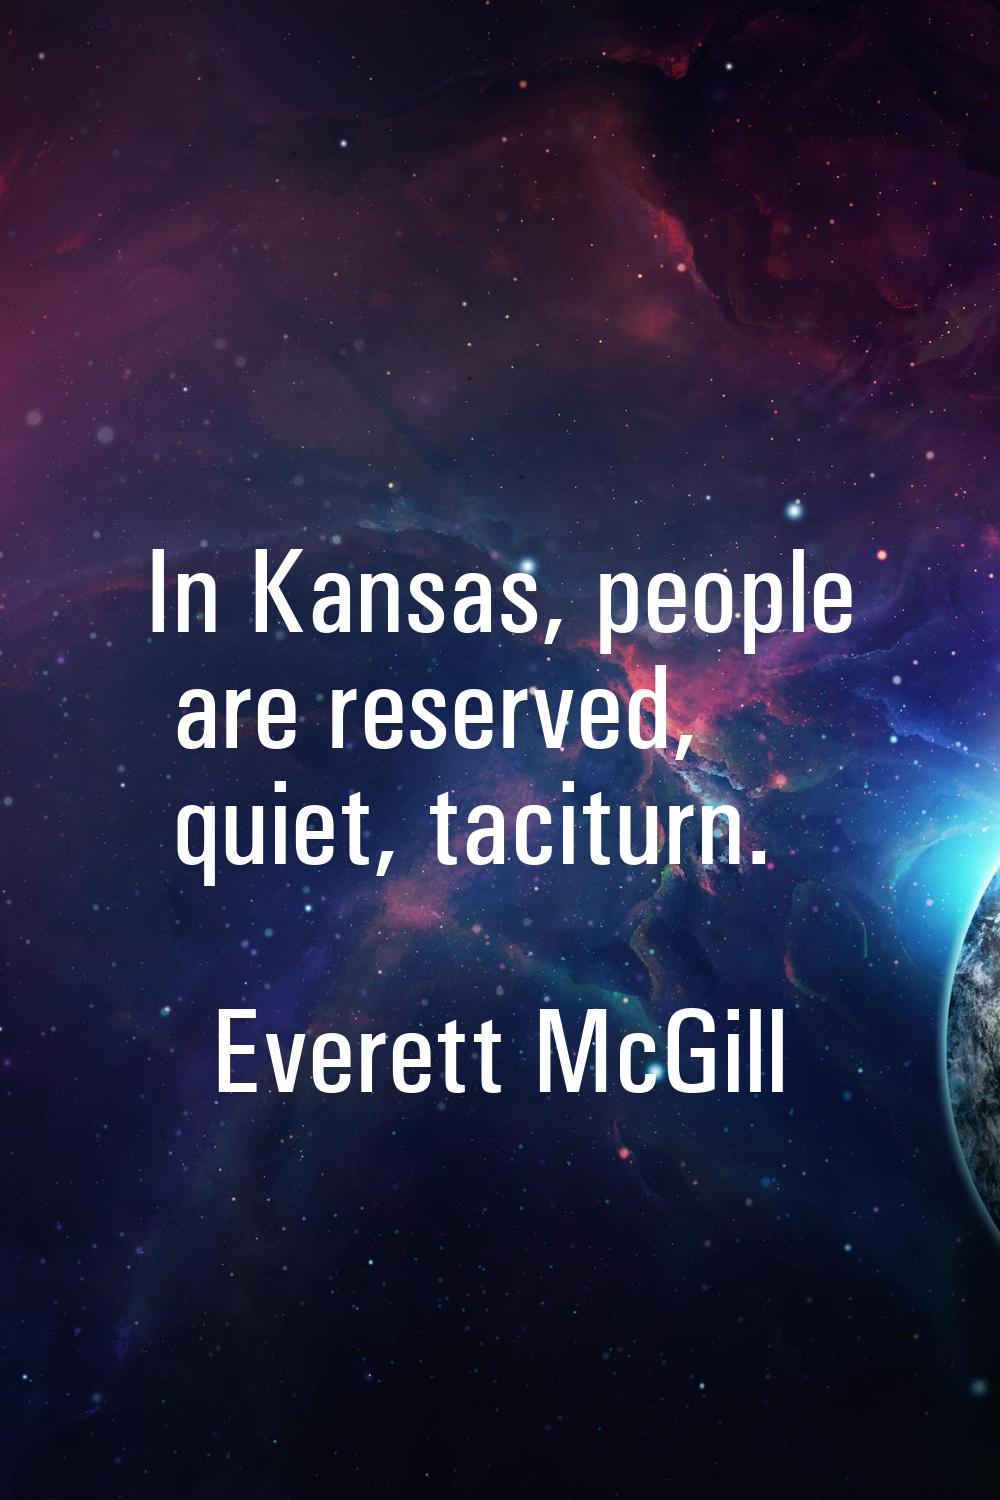 In Kansas, people are reserved, quiet, taciturn.